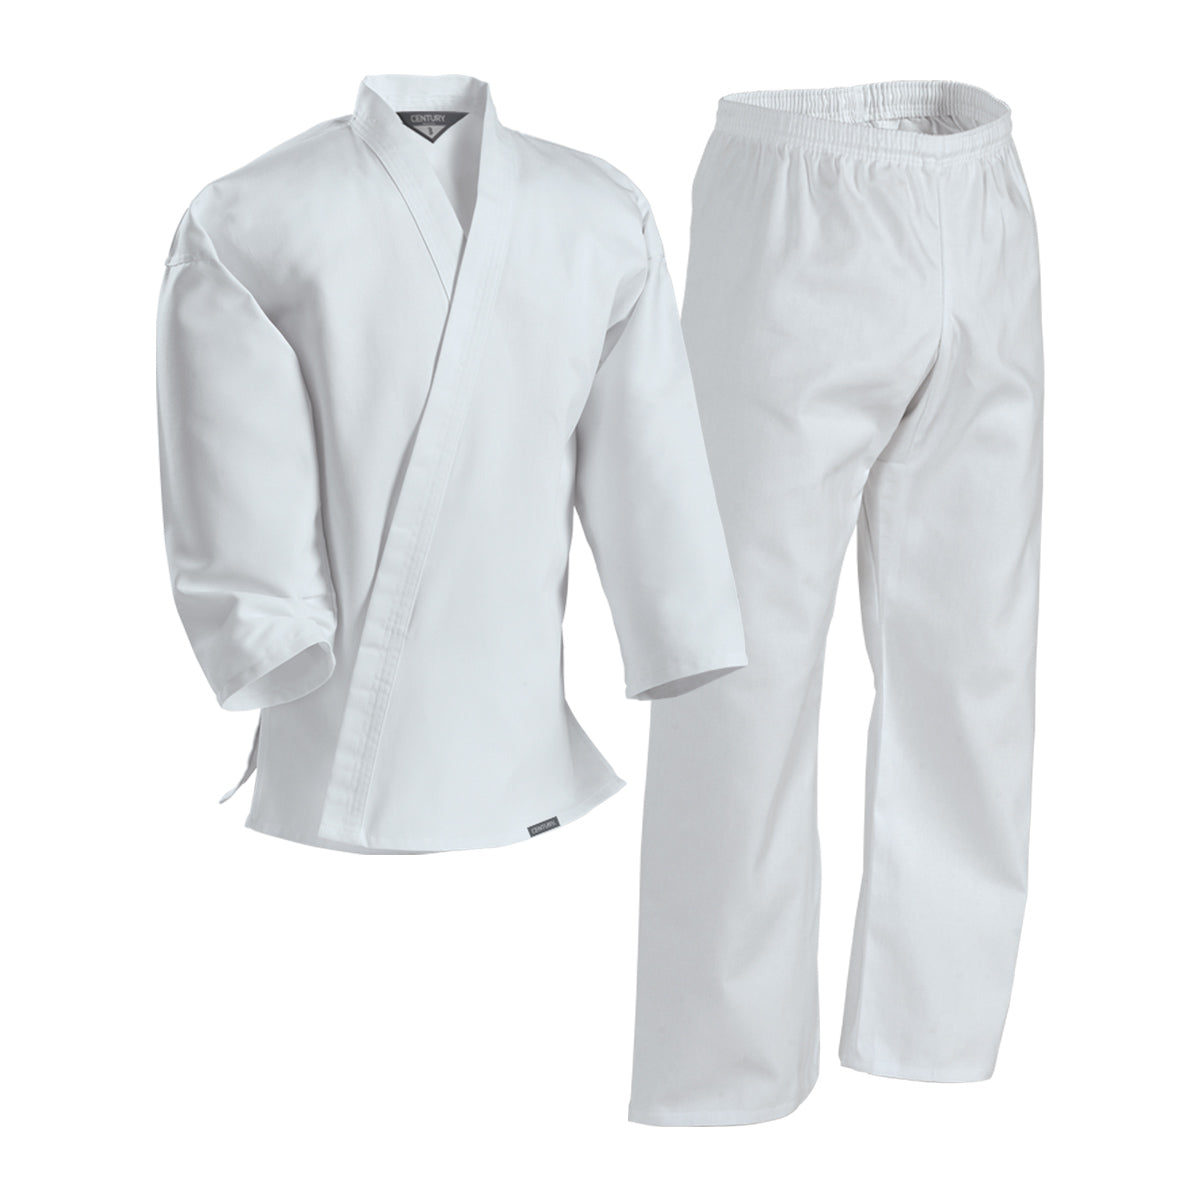 7 oz. Middleweight Student Uniform with Elastic Pants White